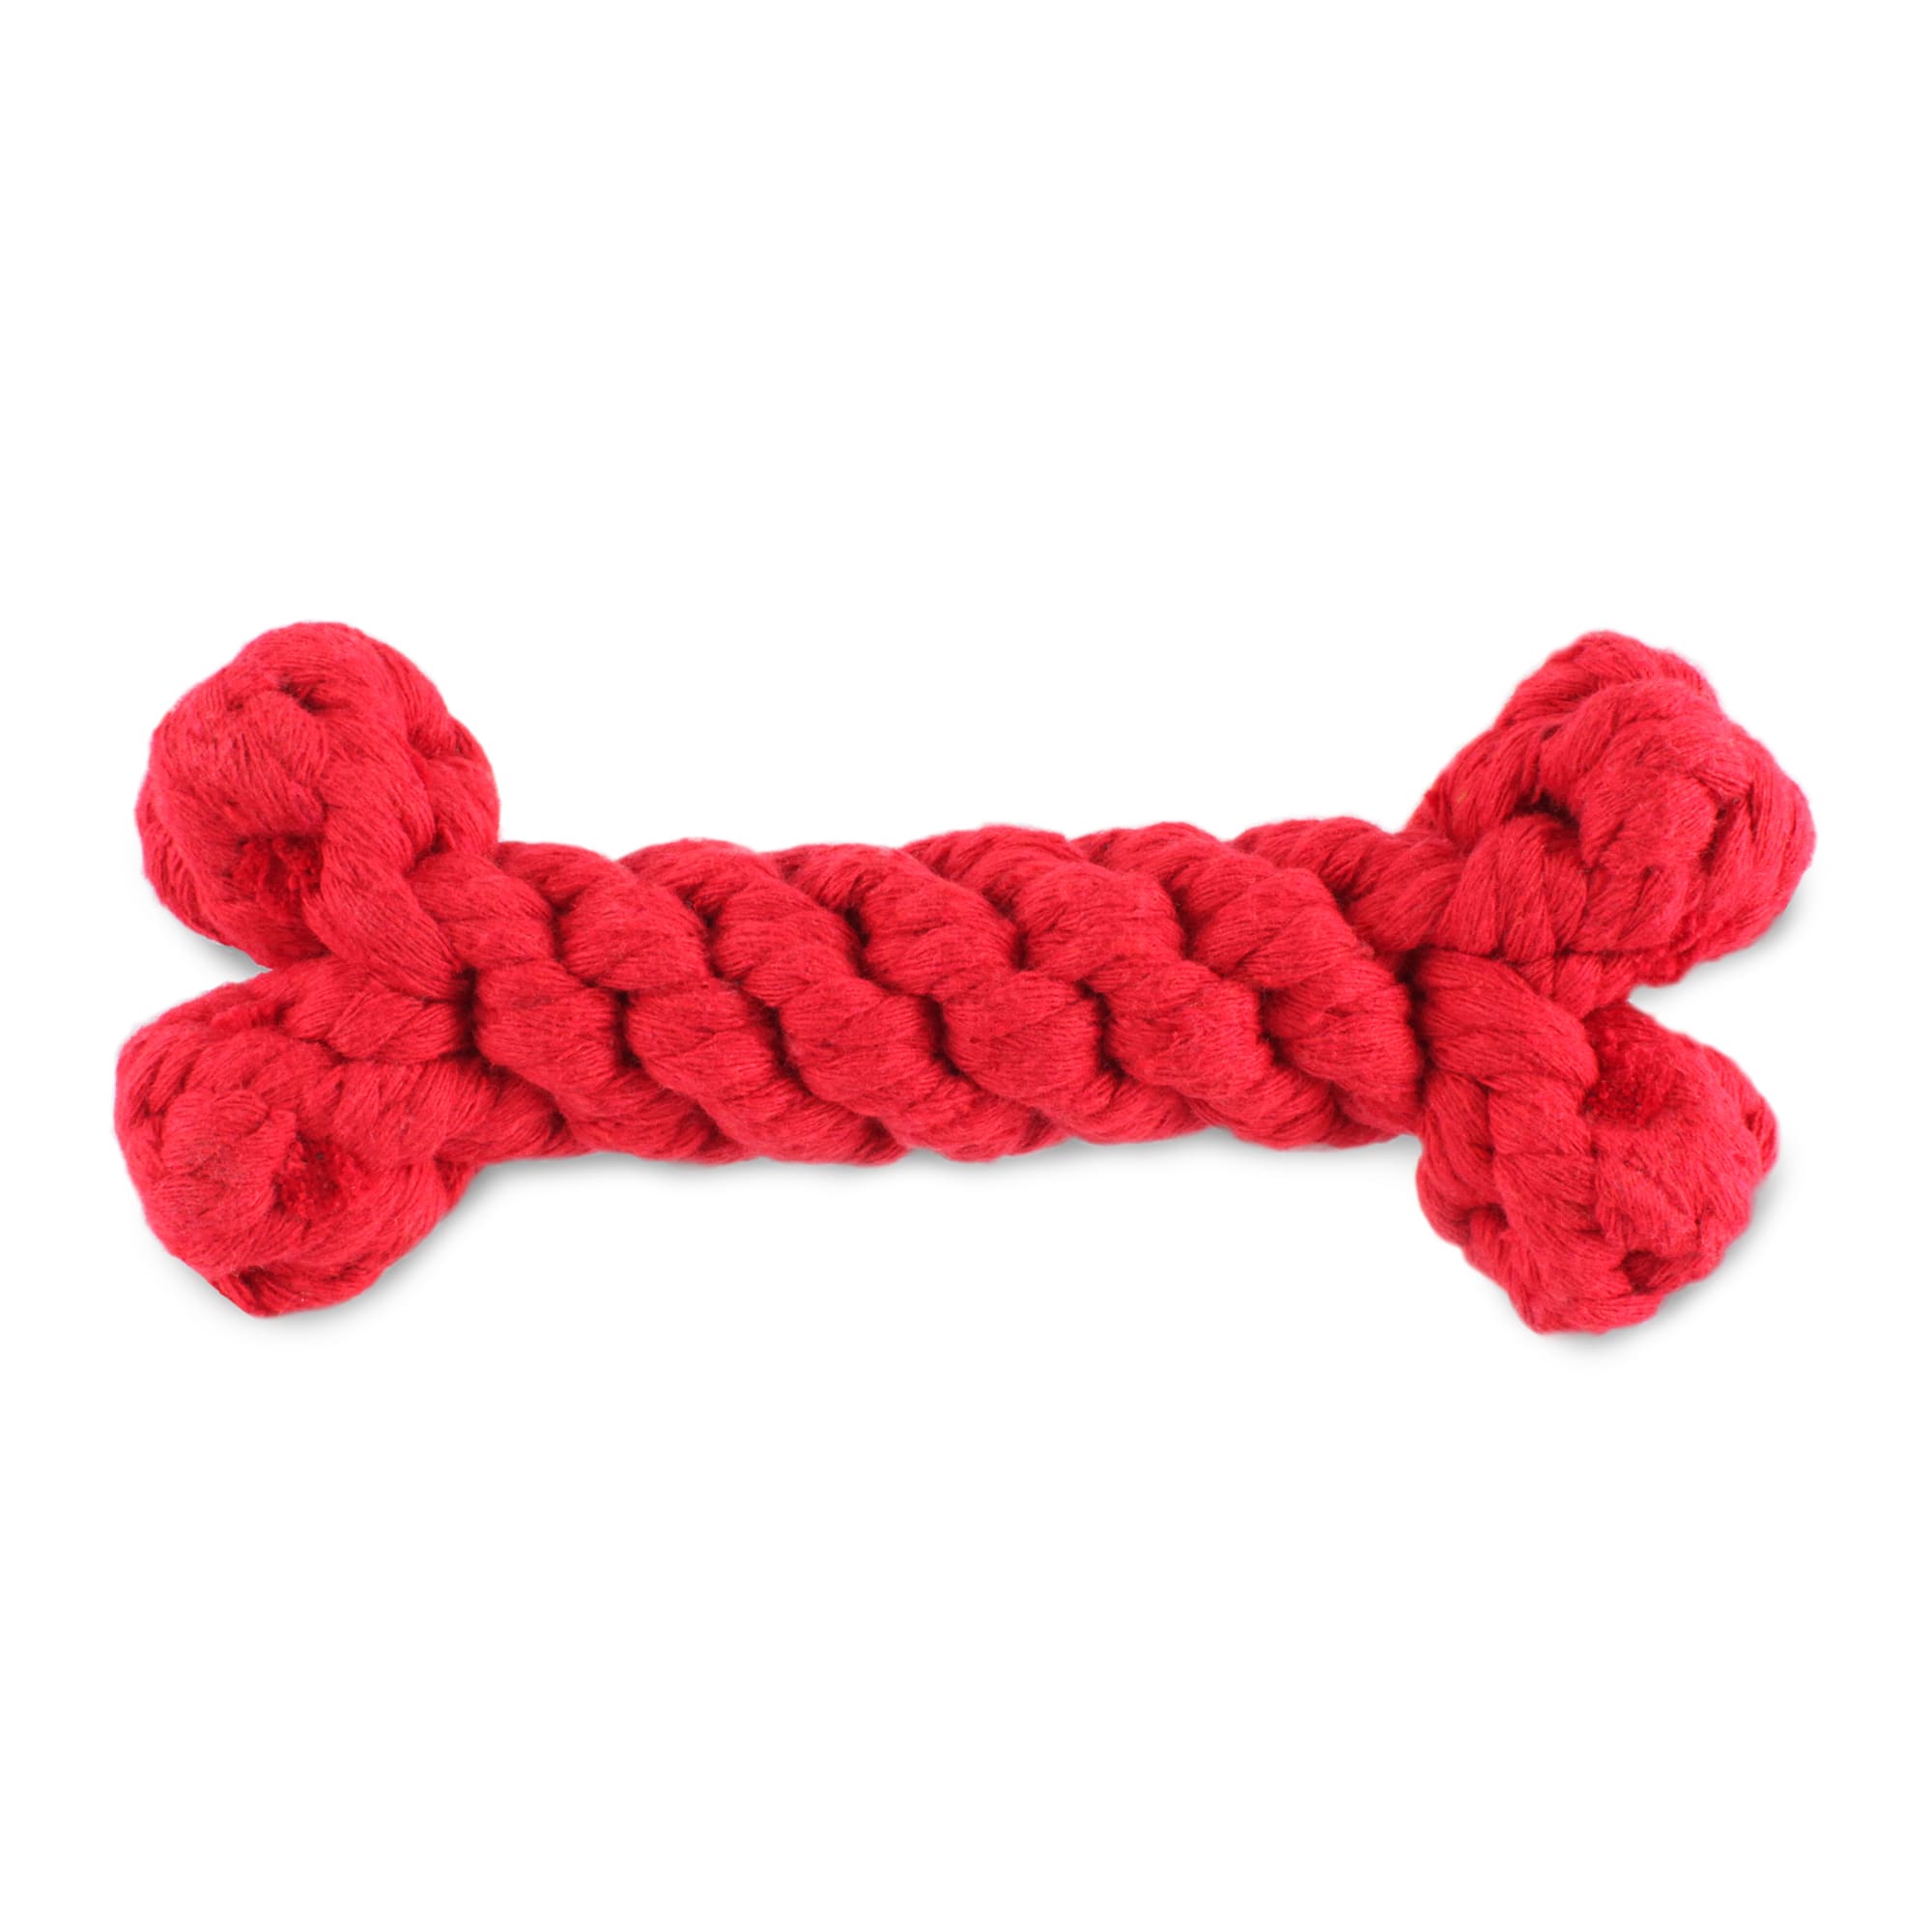 NCAA Pet Tug Toys Bone with Rope Toy Louisville Cardinals Red/Gray